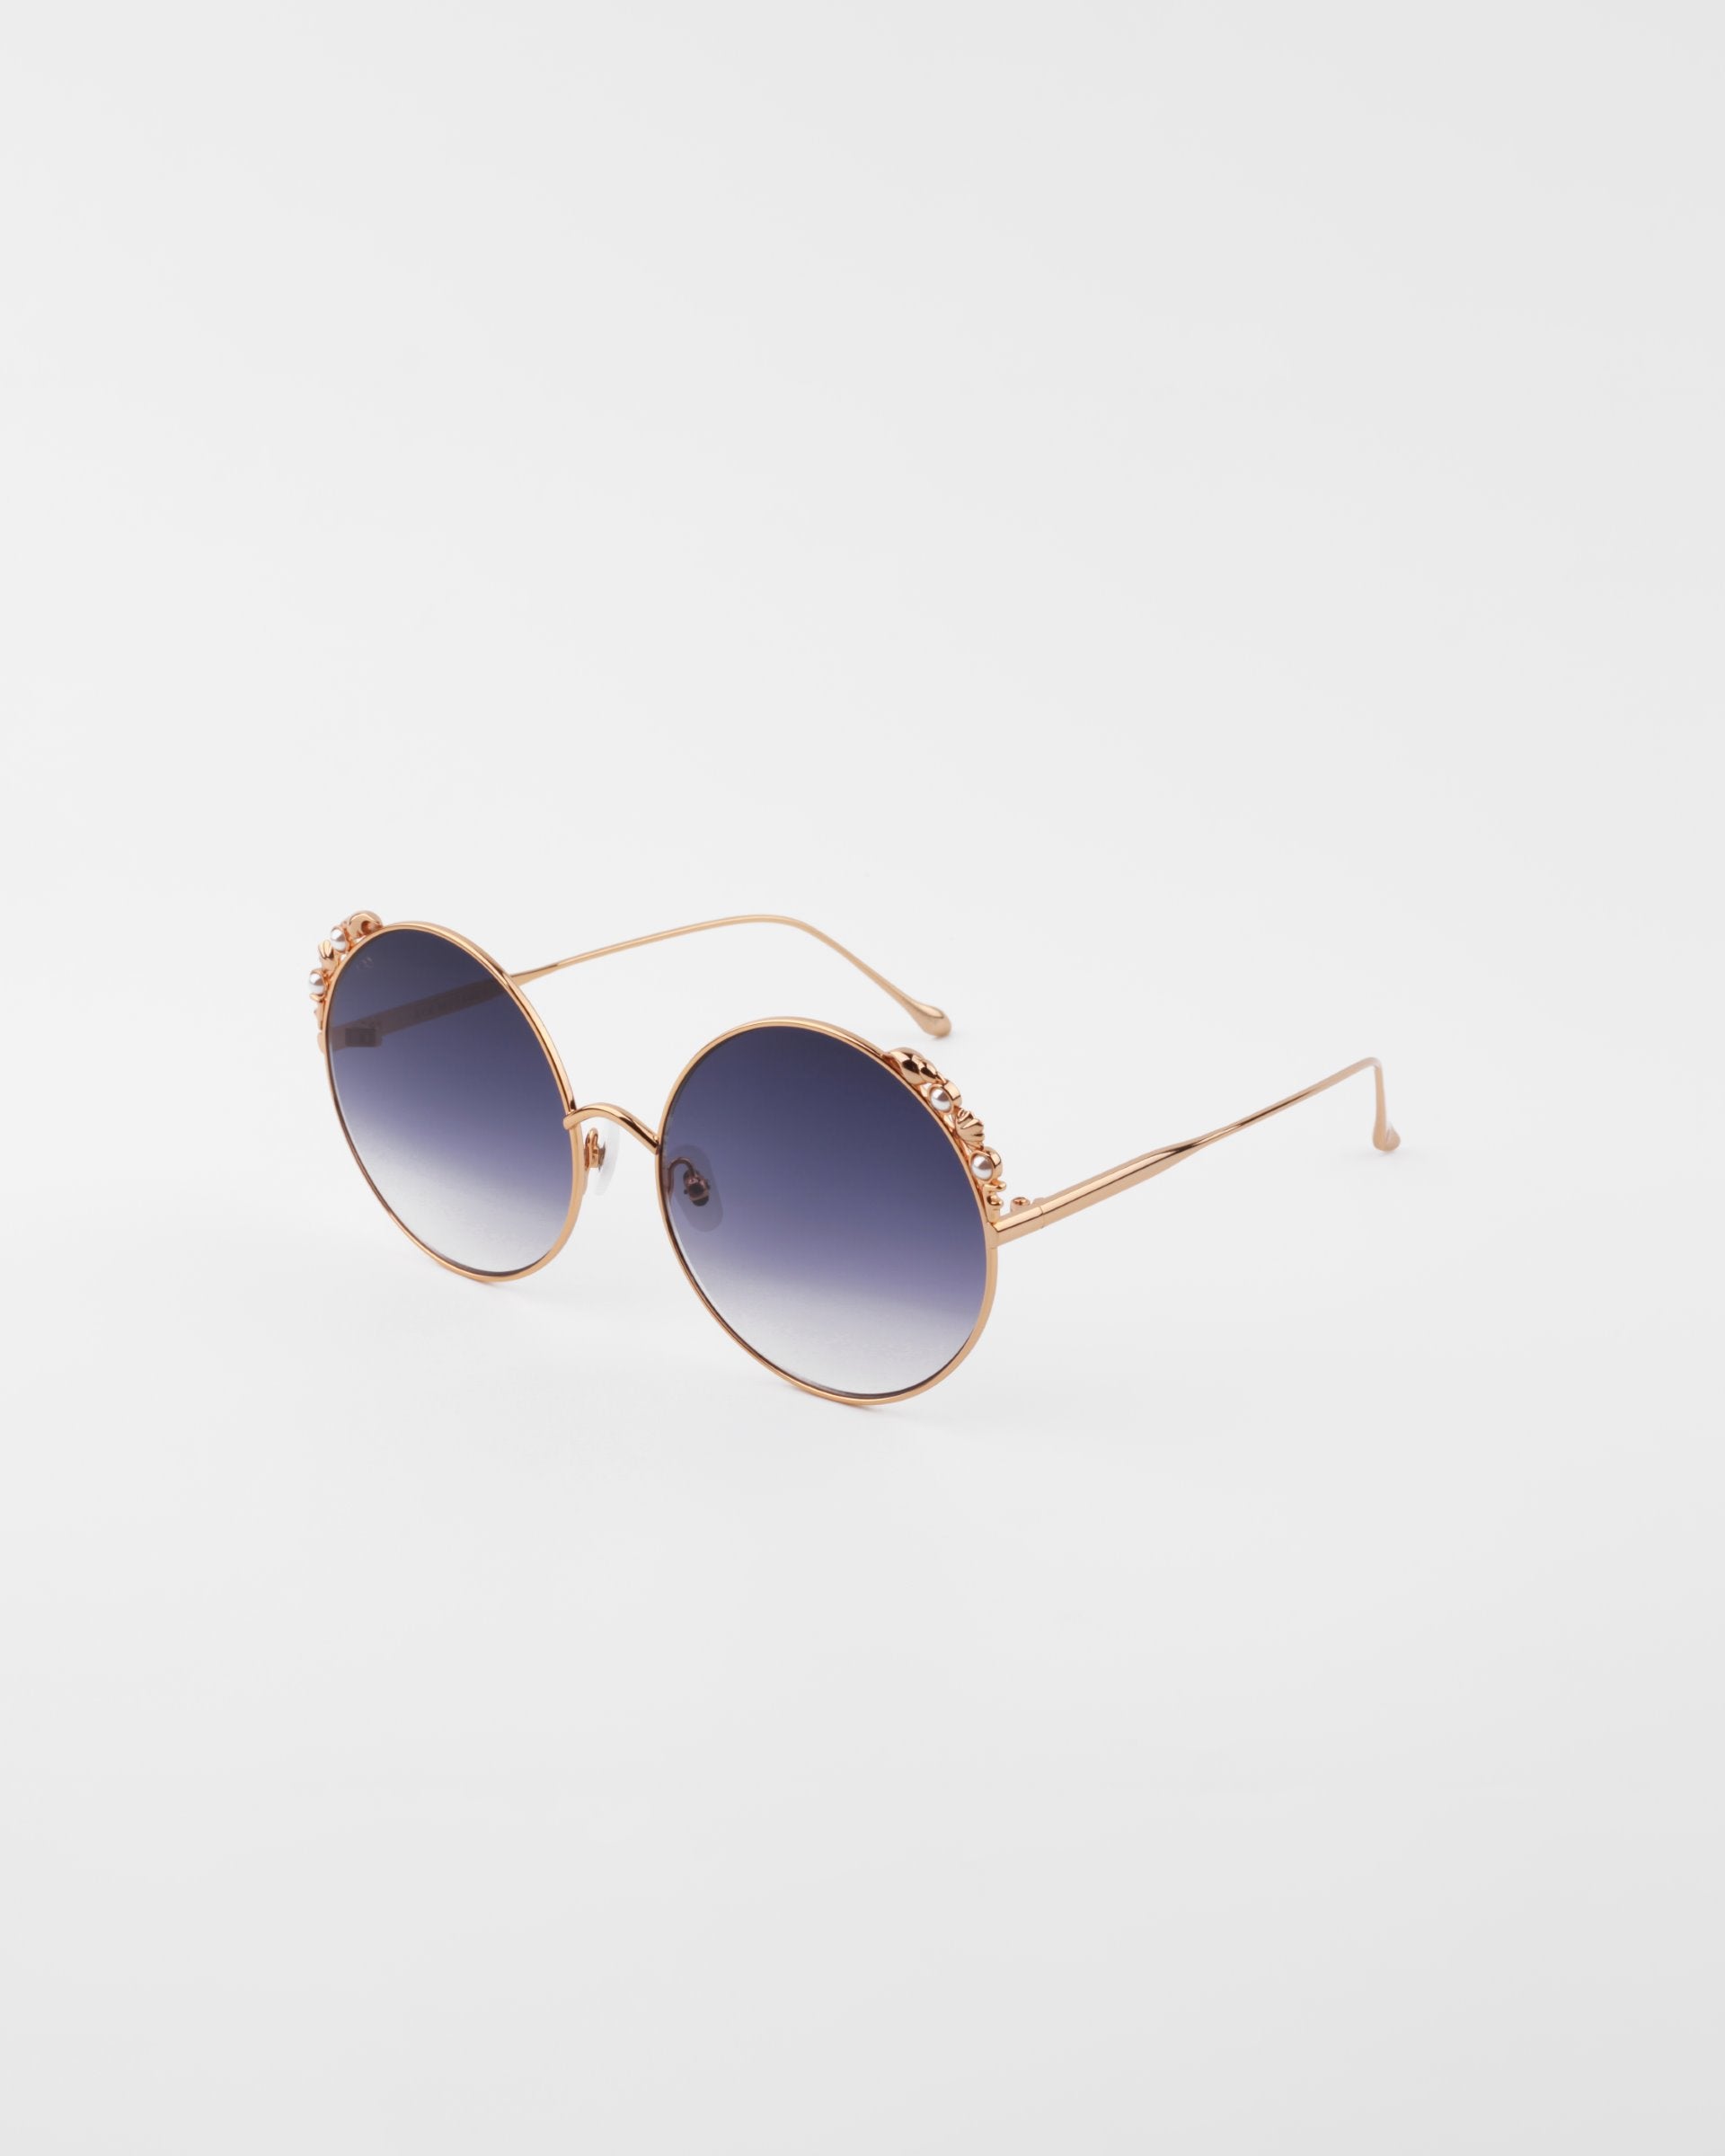 Round sunglasses with gold-colored frames and blue gradient lenses. Handmade gold-plated detailing adorns the top of the lenses. The ultra-lightweight shatter resistant lenses are 100% UVA &amp; UVB-protected, ensuring both style and safety. The Lindy by For Art&#39;s Sake® is positioned against a plain white background.